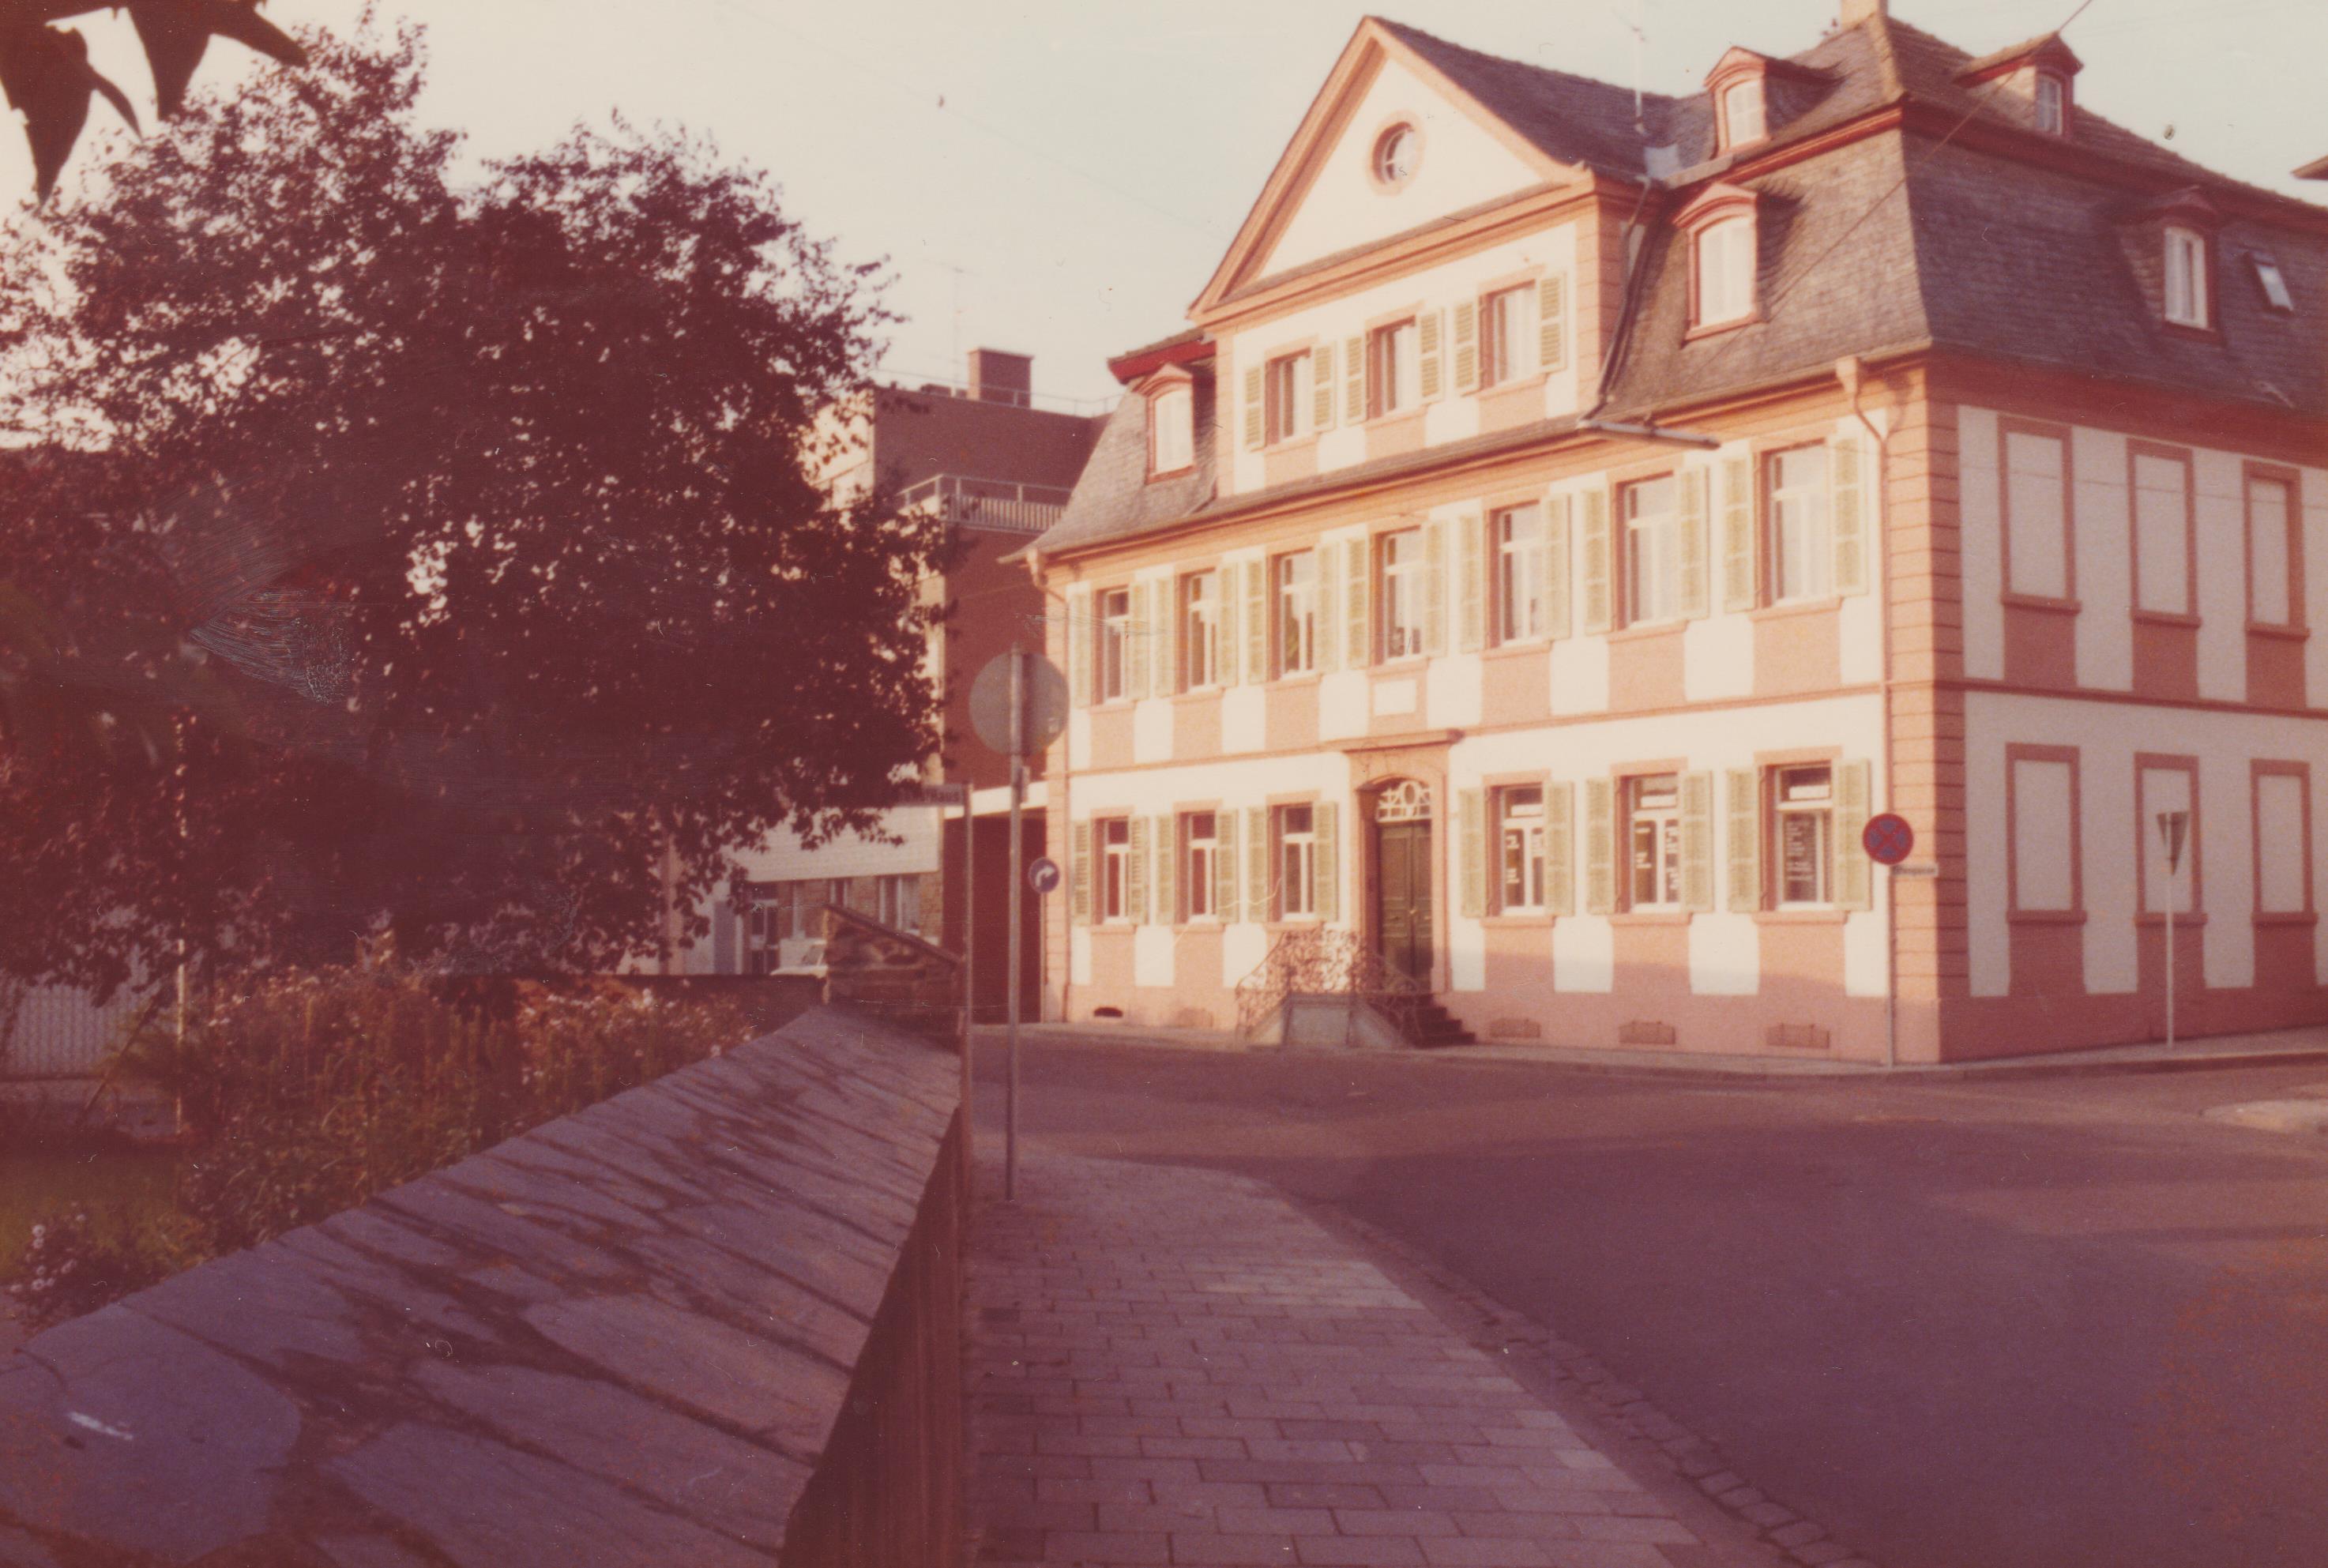 Stammhaus der Familie Remy in Bendorf, 1977 (REM CC BY-NC-SA)